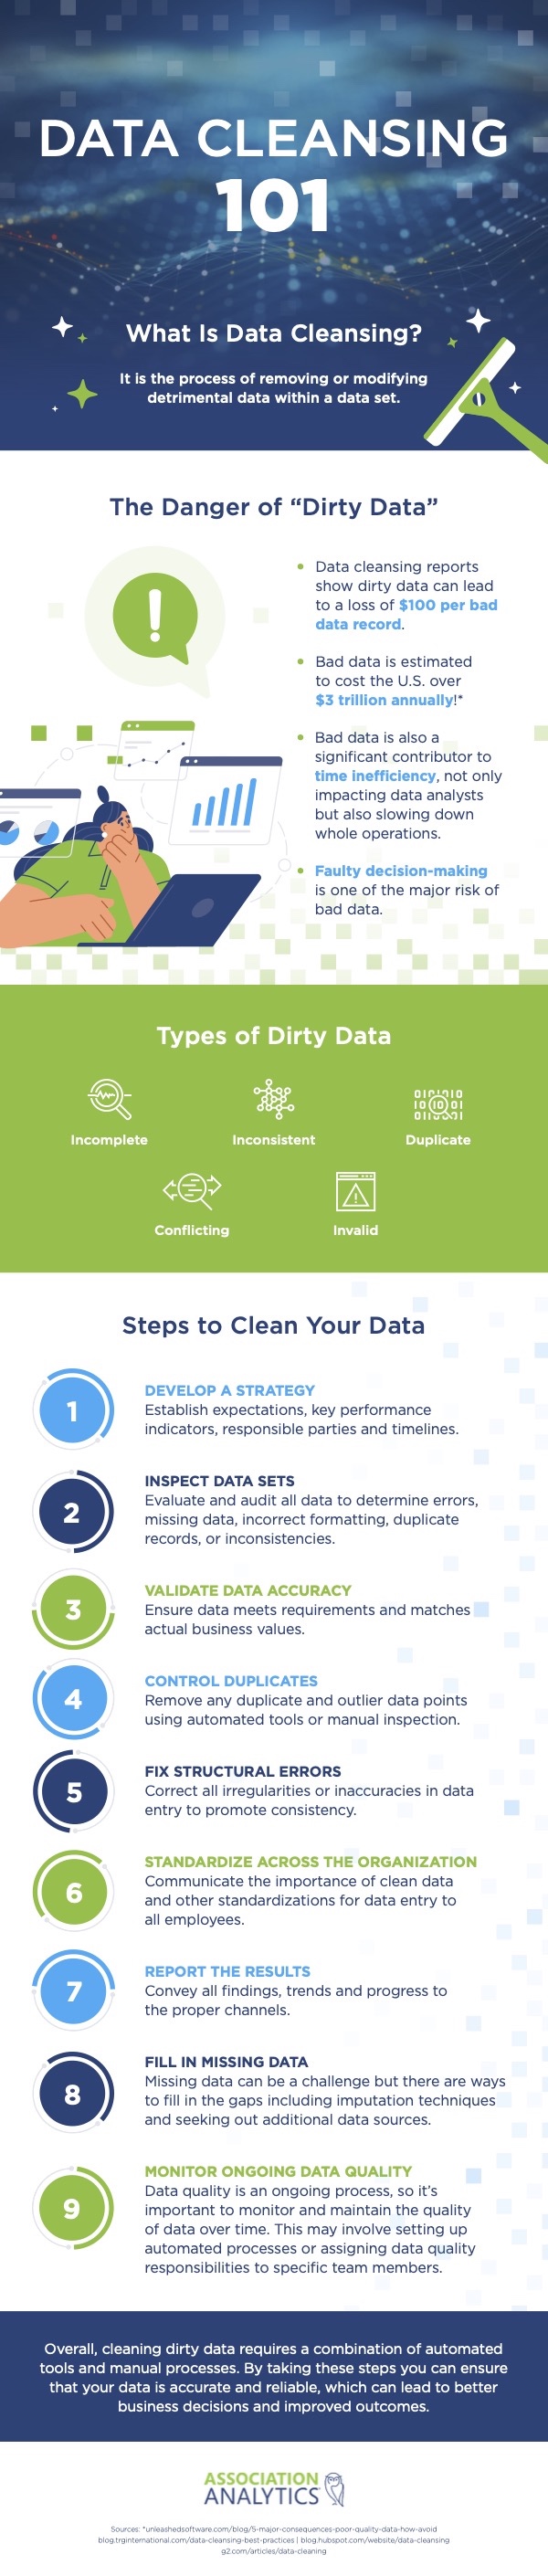 Data cleansing 101 infographic